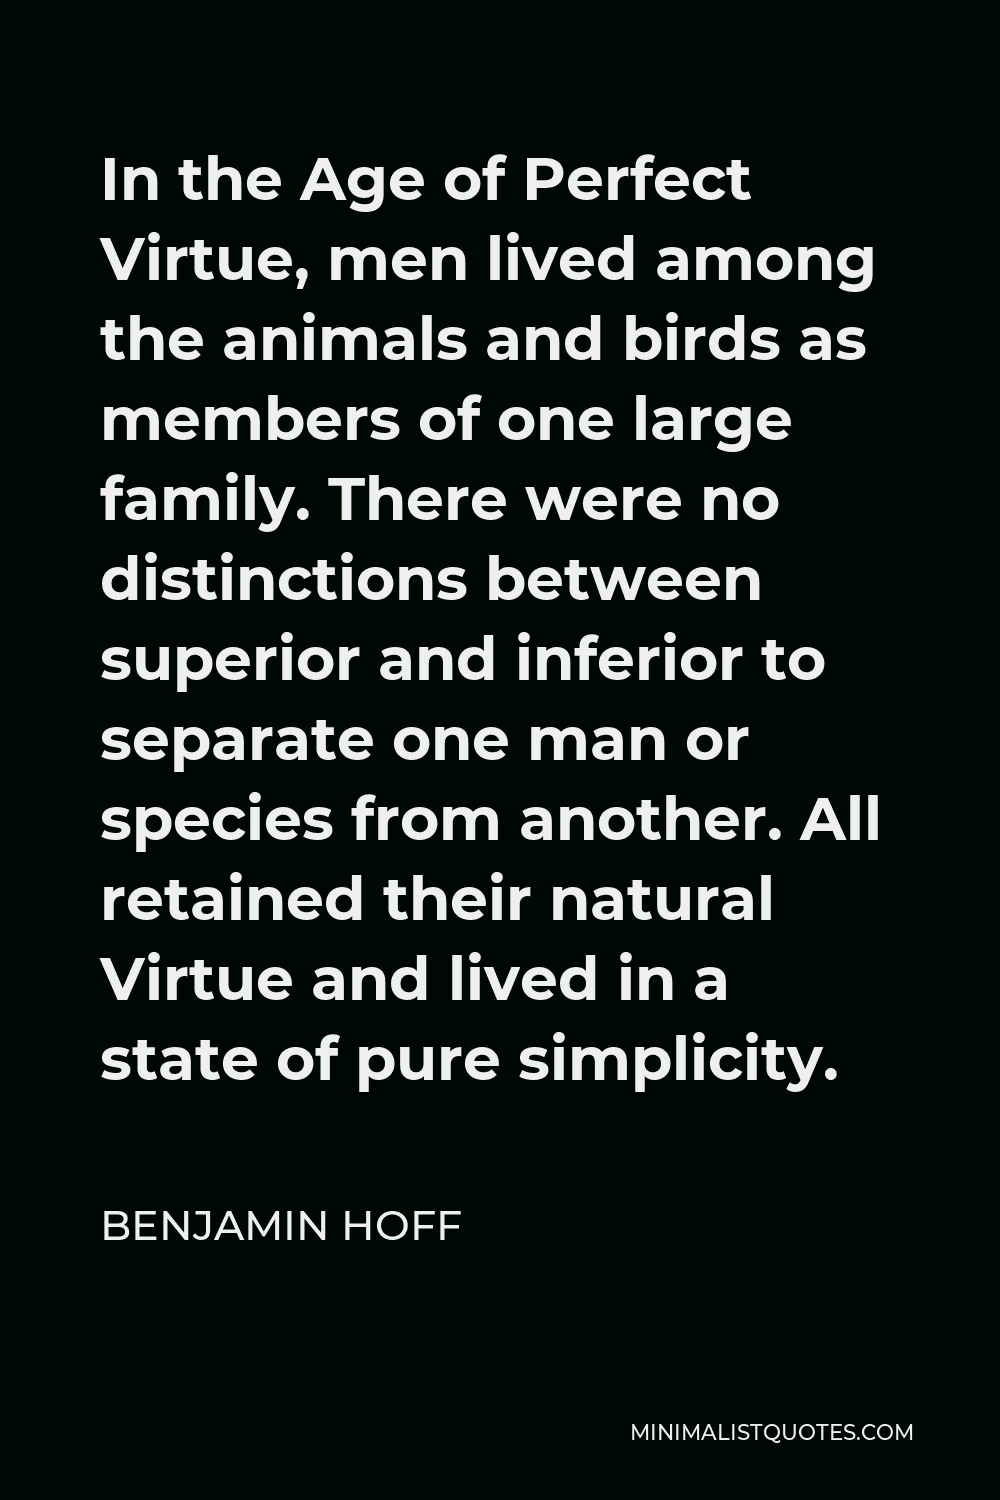 Benjamin Hoff Quote - In the Age of Perfect Virtue, men lived among the animals and birds as members of one large family. There were no distinctions between superior and inferior to separate one man or species from another. All retained their natural Virtue and lived in a state of pure simplicity.